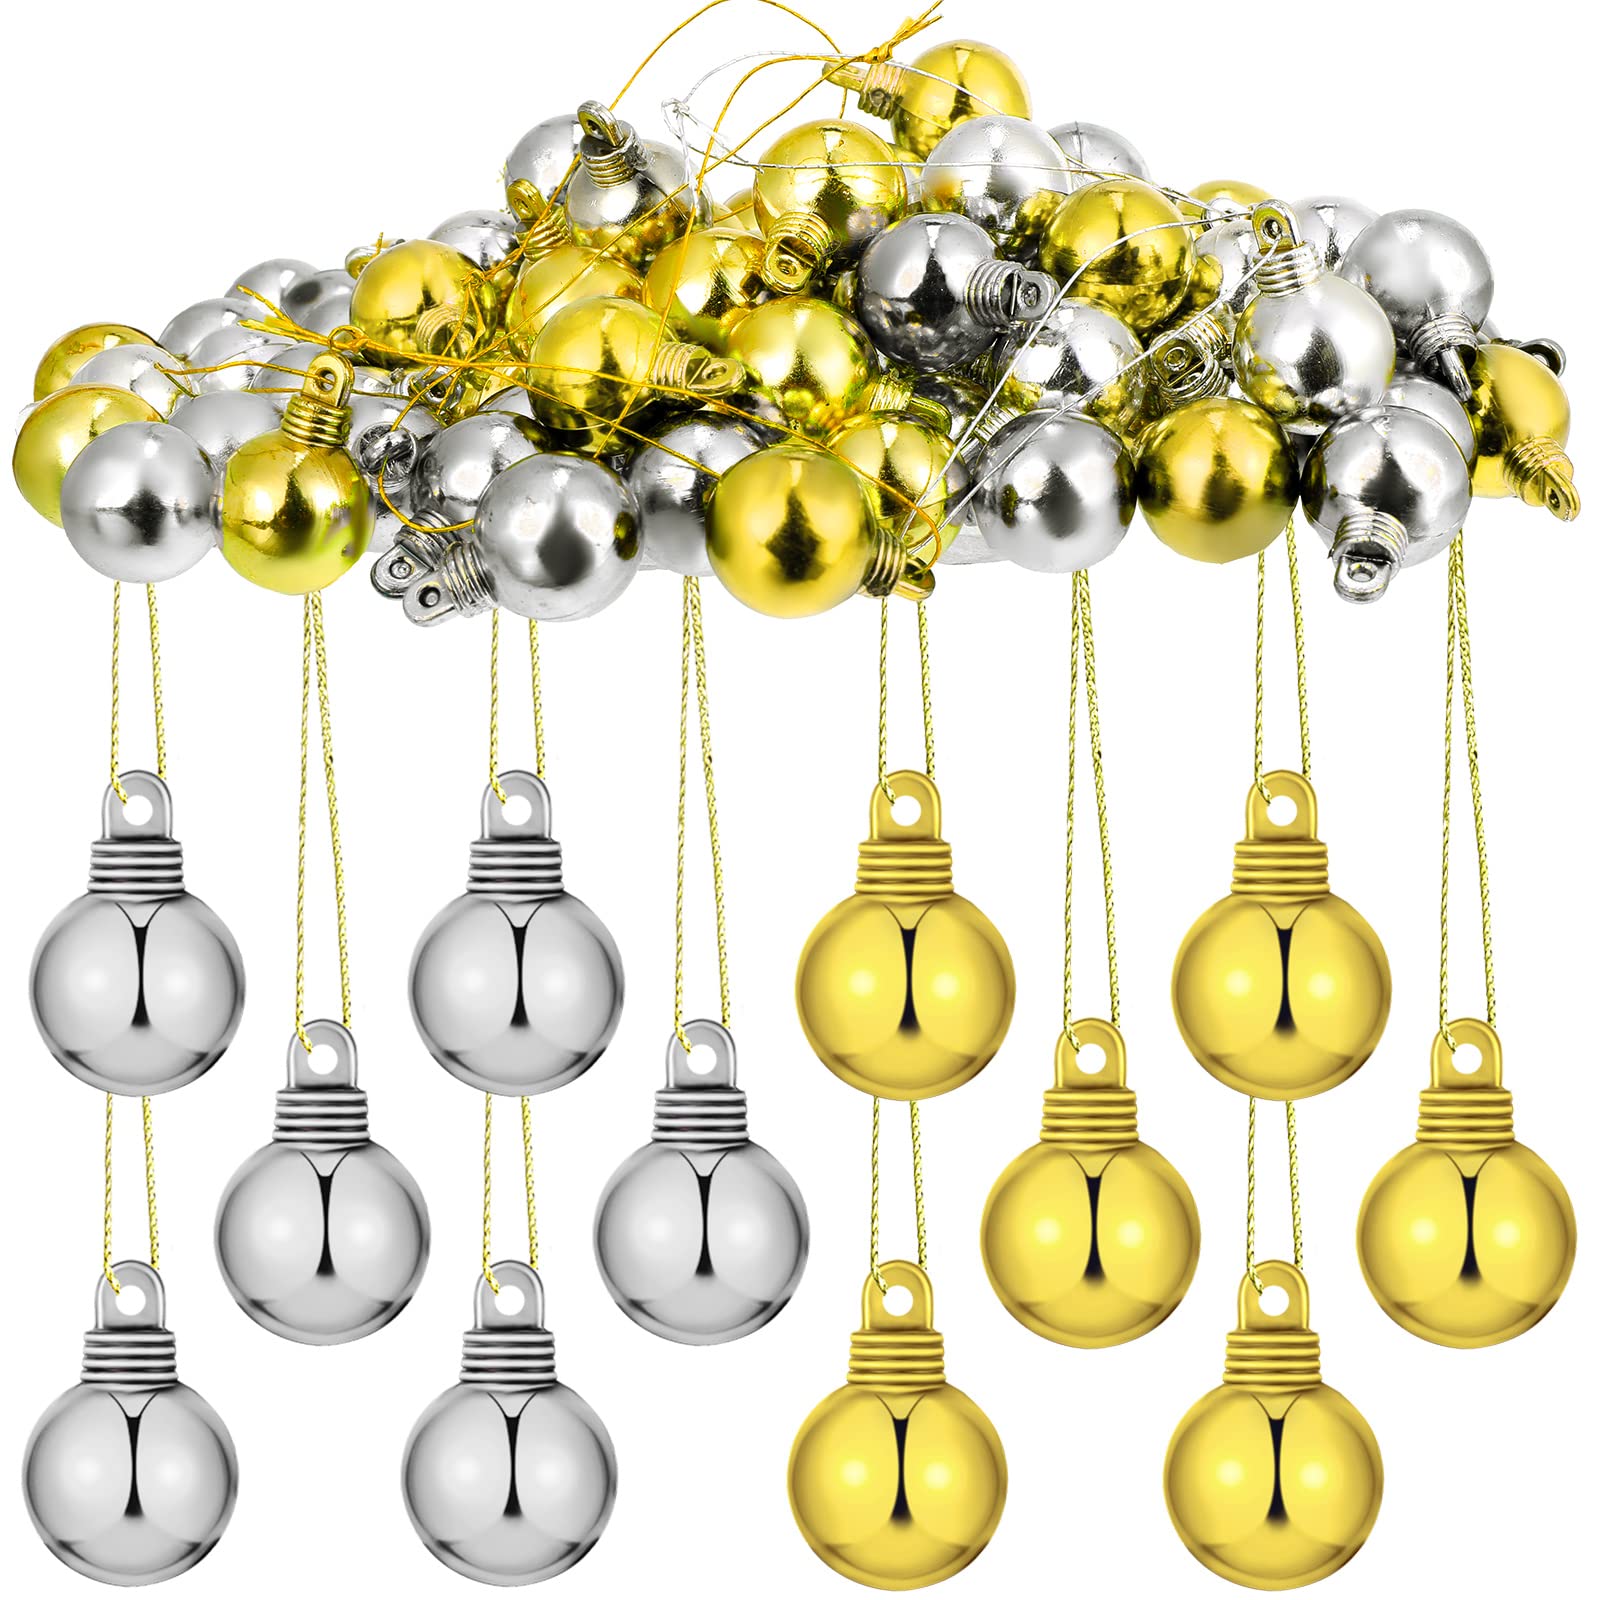 BOAO 96 Pieces Christmas Balls Xmas Tree Ornaments Balls Exquisite Colorful Ball Decoration Pendant for Holiday Party Decor (Gold, Si